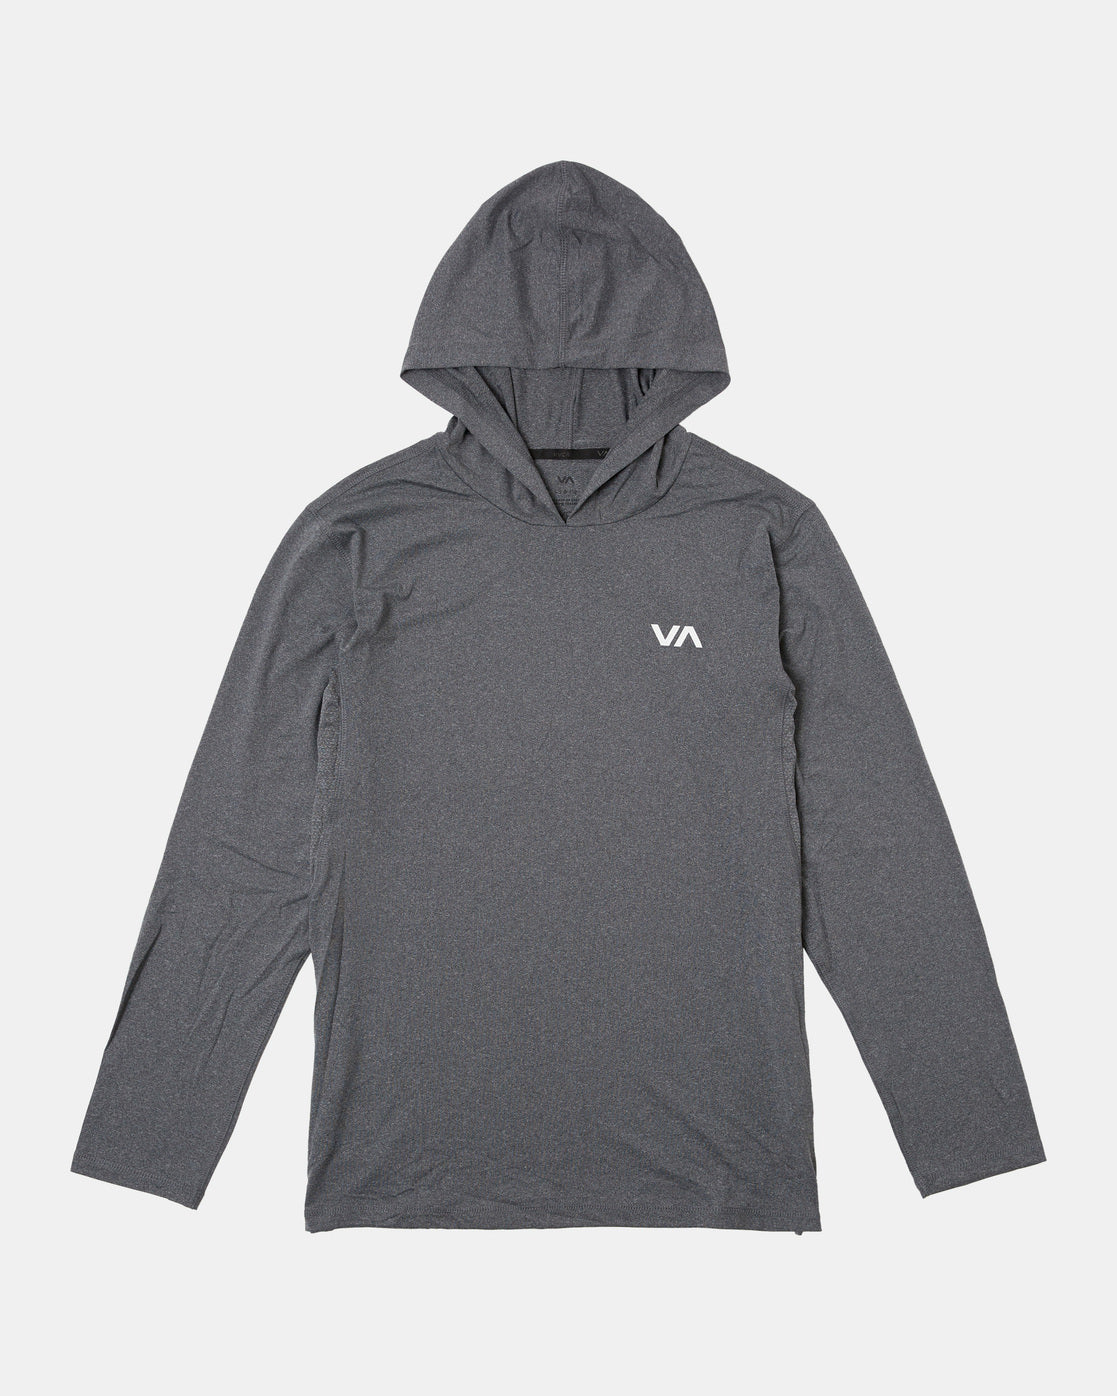 Sport Vent Technical Hooded Top - Charcoal Heather – RVCA.com